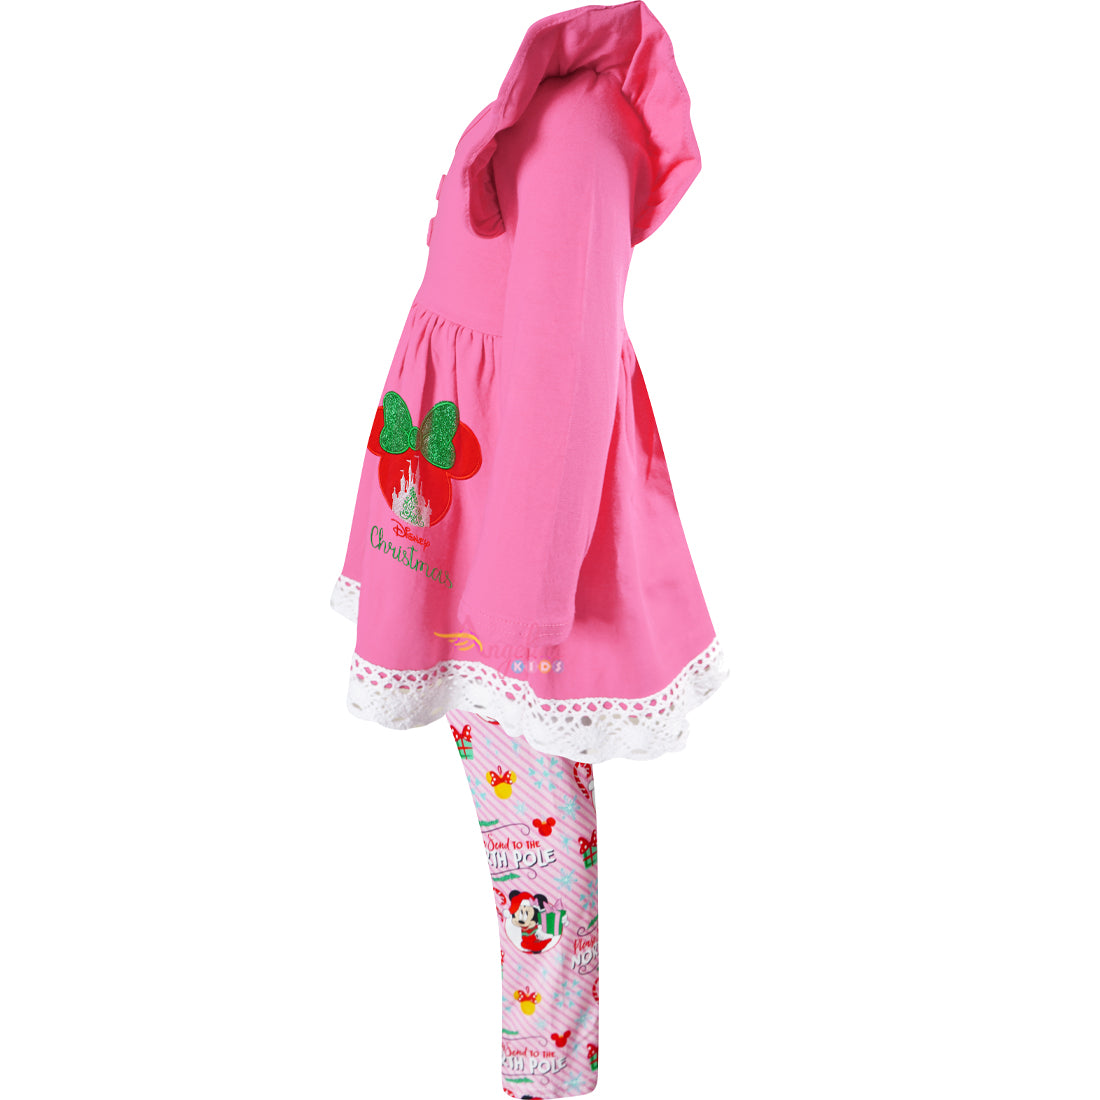 Baby Girls Merry Christmas Disney Inspired Outfit With Scarf 3-pcs Sets - Angeline Kids